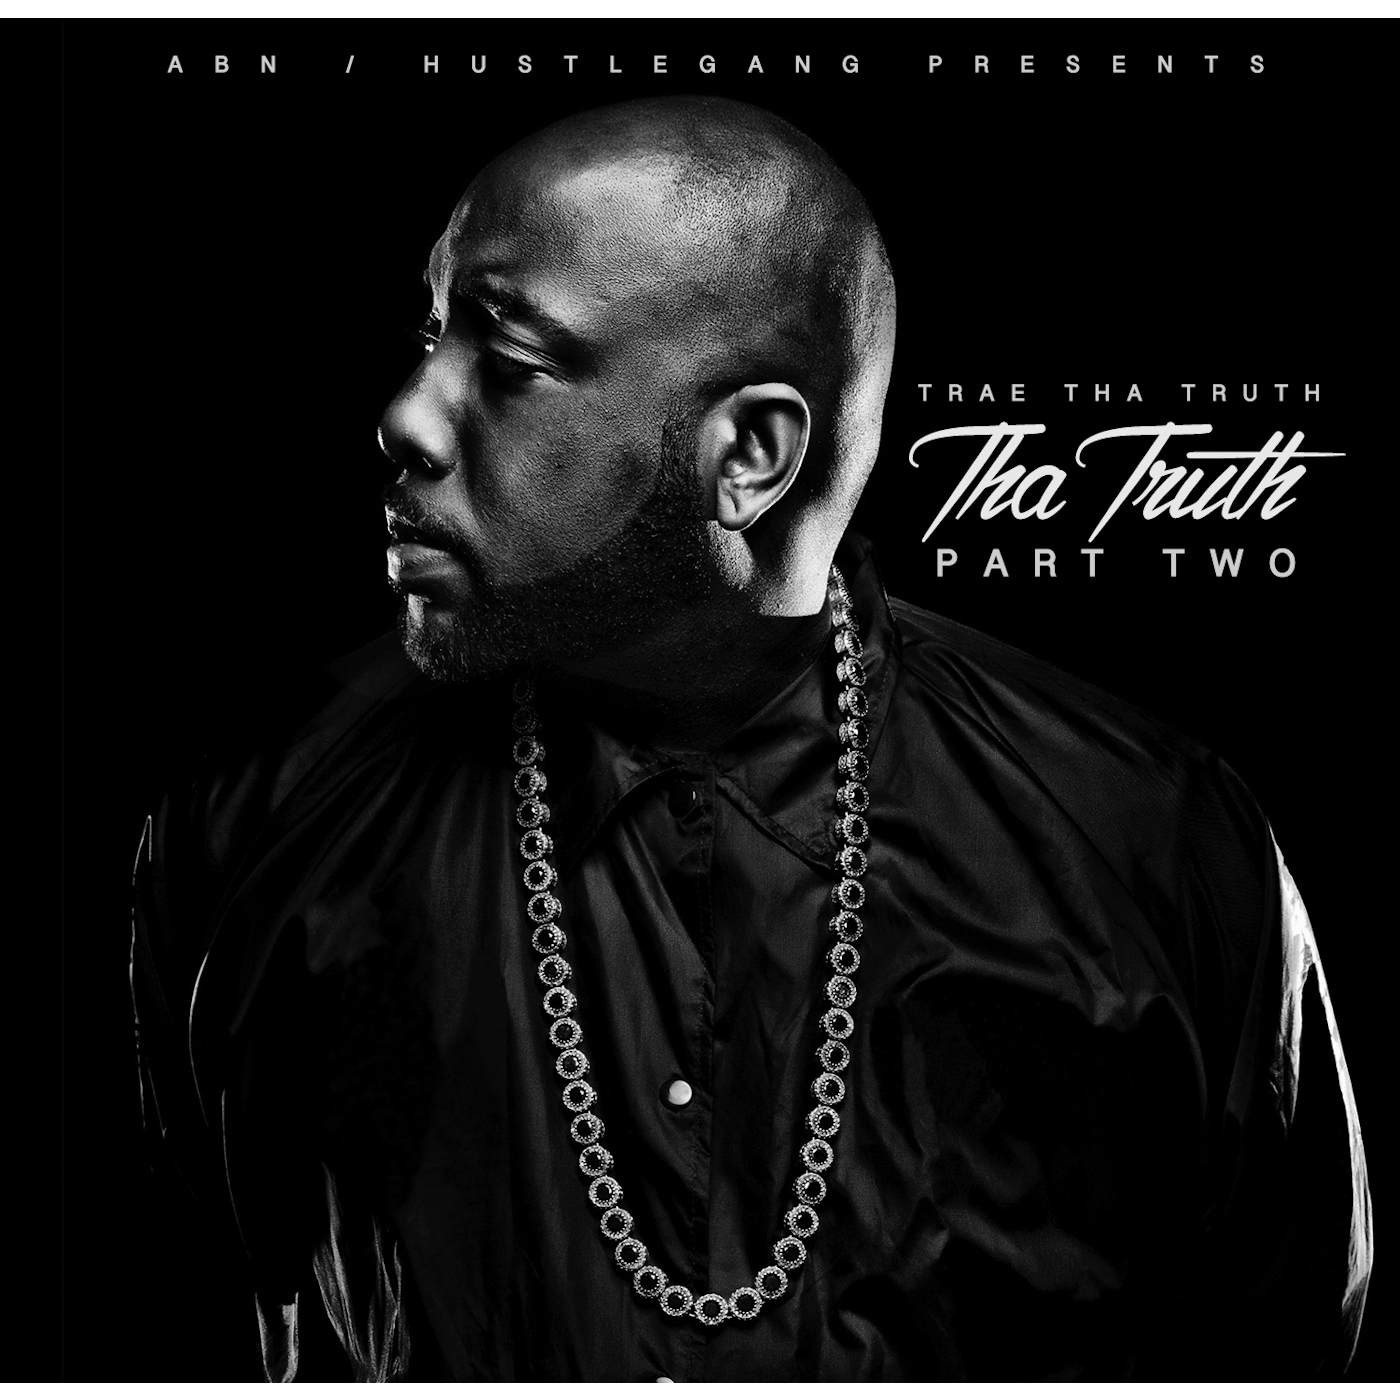 Trae tha Truth & The Worlds Freshest THA TRUTH PART TWO CD